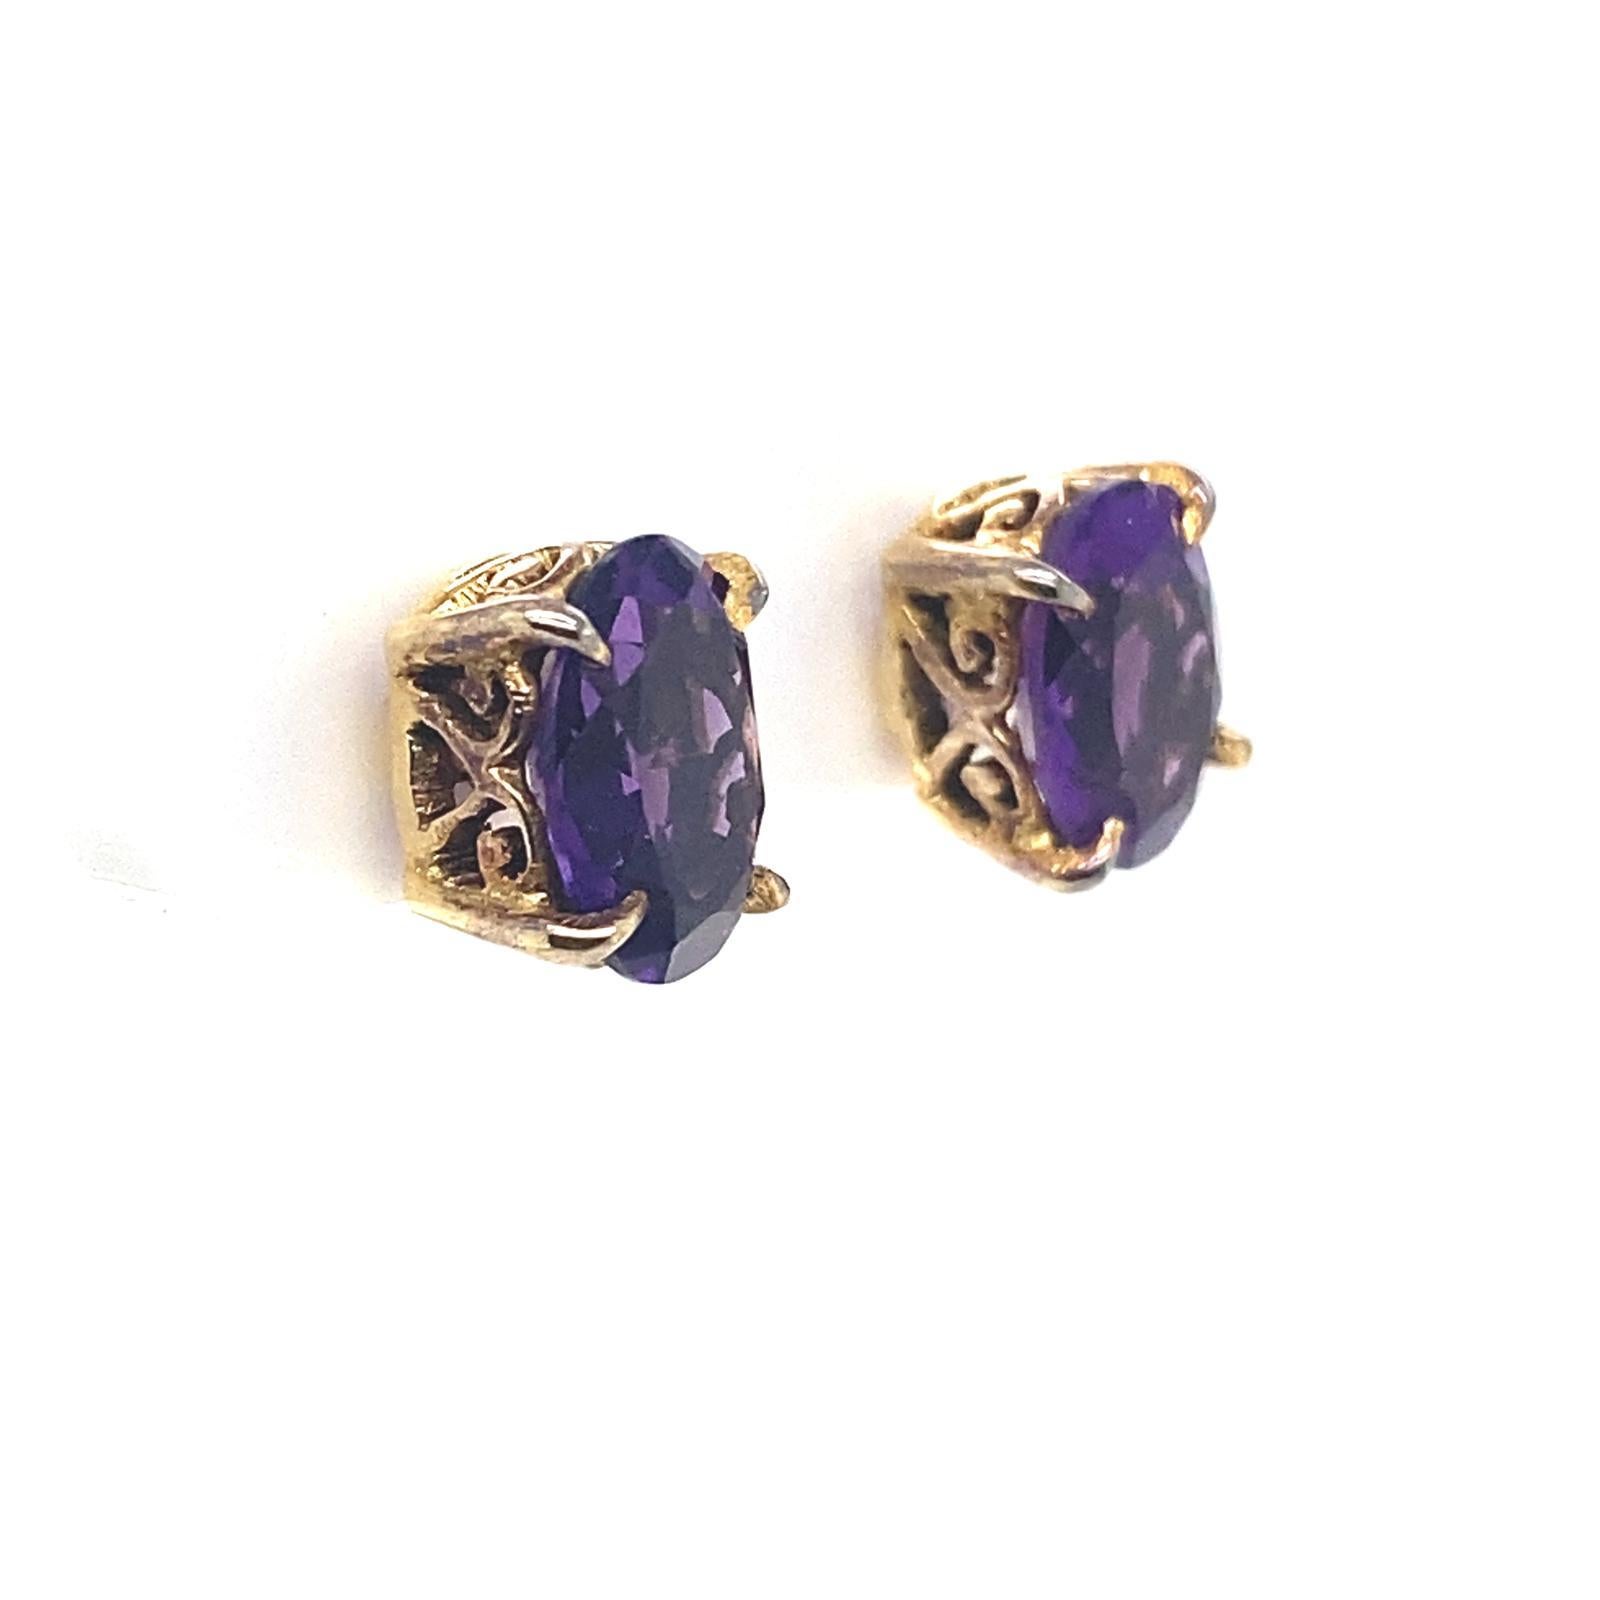 A pair of vintage amethyst oval stud earrings in 15 karat yellow gold.

This pair of oval cut amethyst stud earrings total 1.16 carats approximately and are claw set in 15 karat yellow gold fittings.

The deep purple hue of the amethysts are a